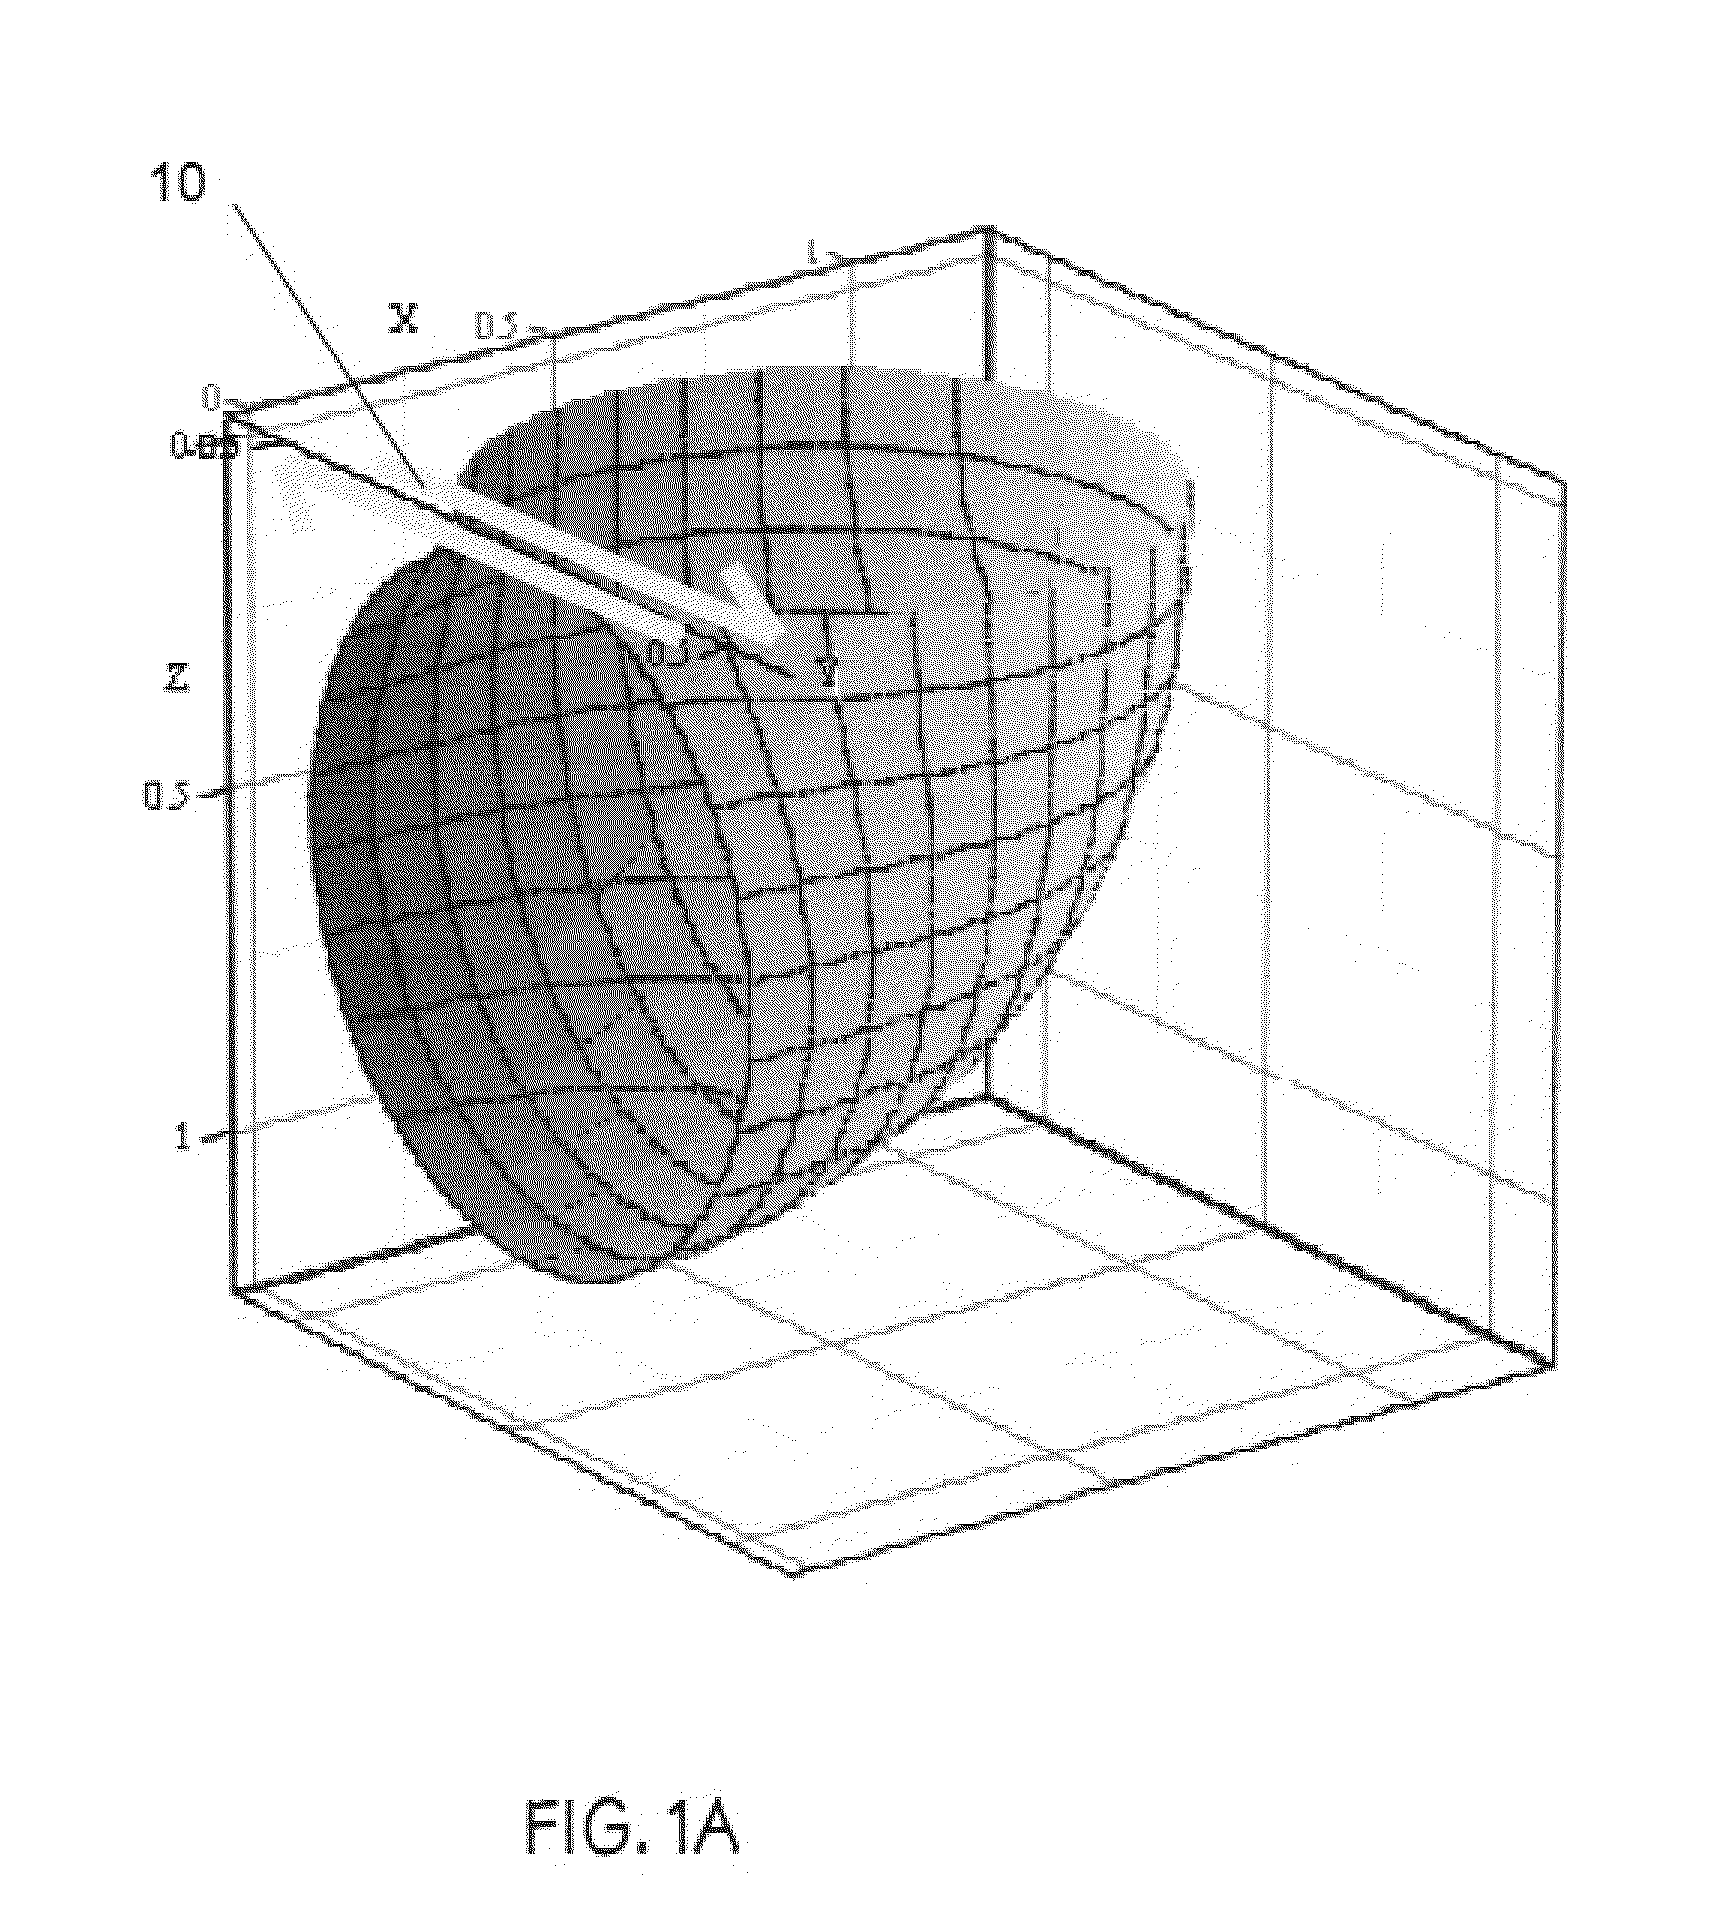 Method and Apparatus for Selective Seismic Detection of Elongated Targets